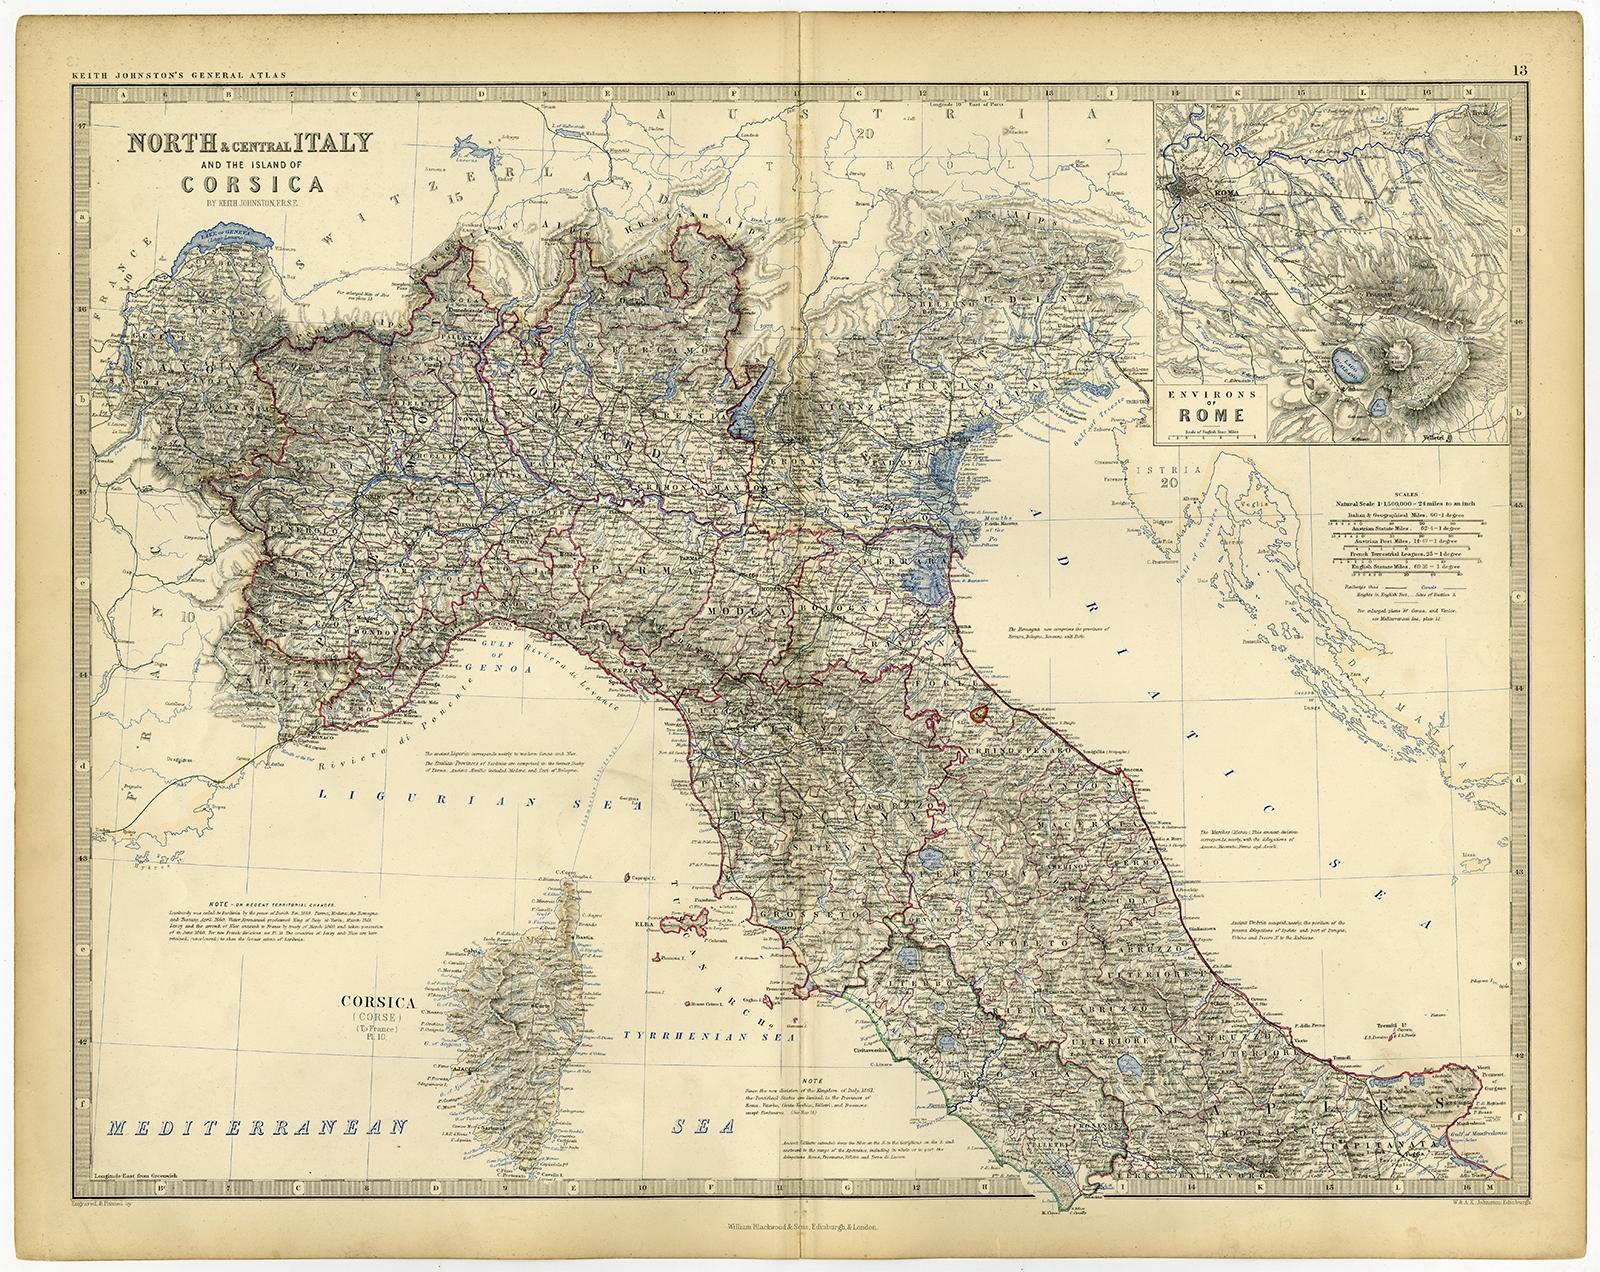 Antique map titled 'North & Central Italy and the Island of Corsica'. 

Old map of North and Central Italy, and the island of Corsica. With an inset map of the region of Rome. Originates from 'The Royal Atlas Of Modern Geography Exhibiting, In A